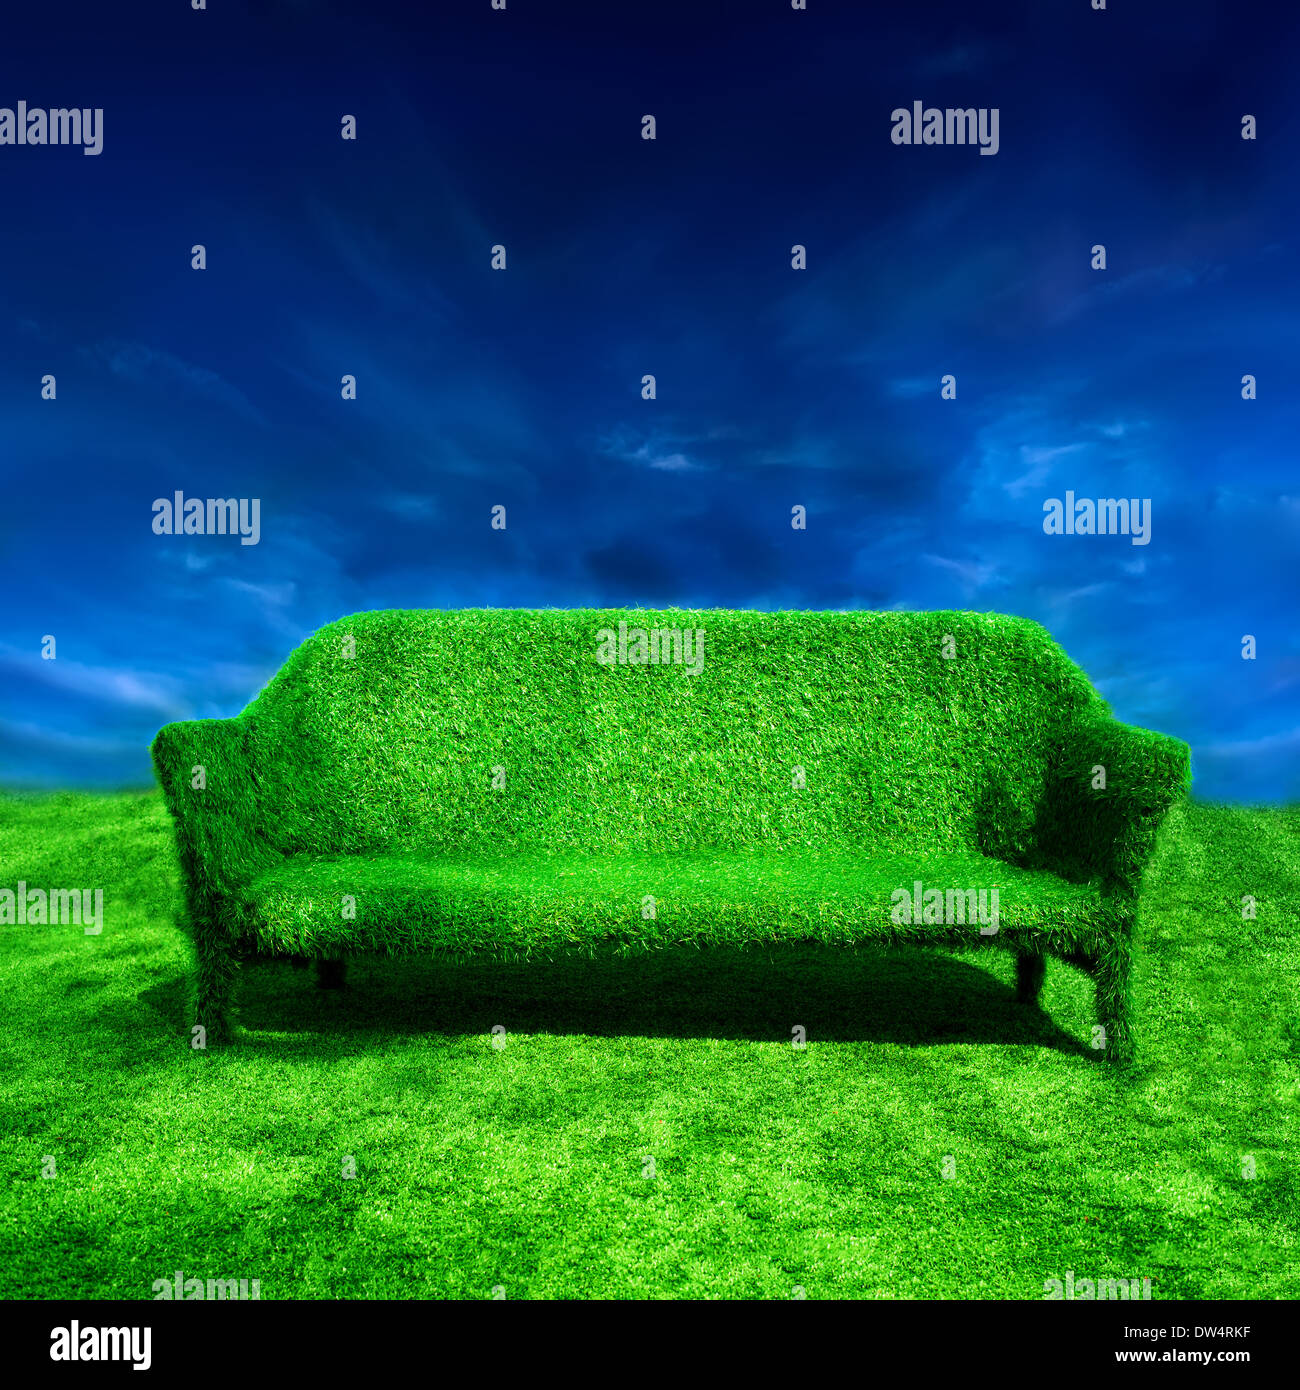 Ecology concept background. Grassy sofa standing at green grass over blue sky Stock Photo